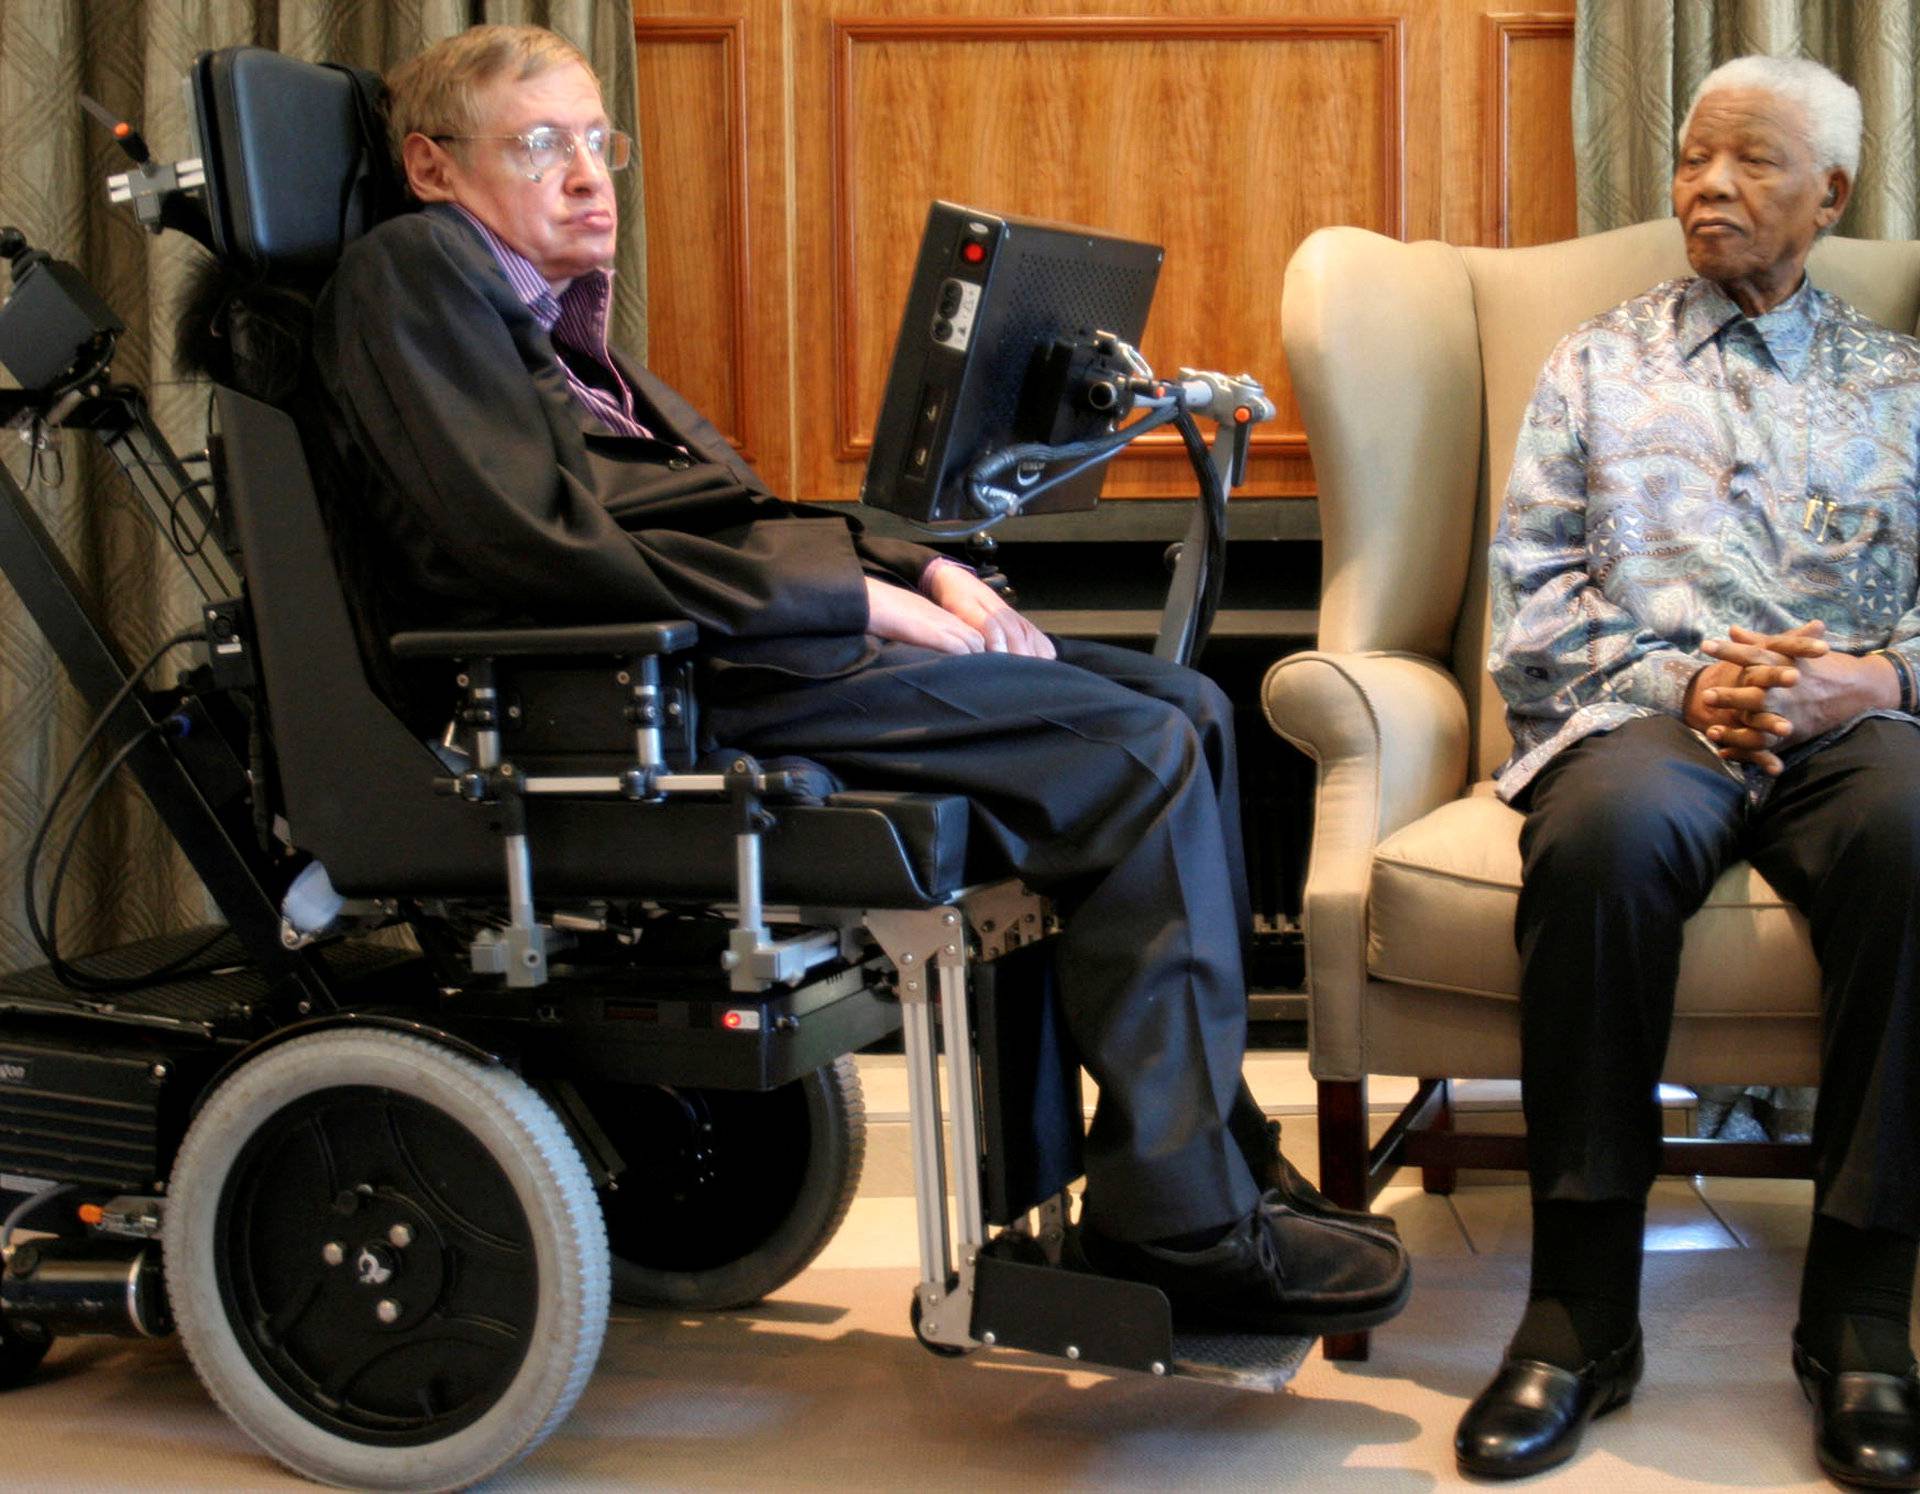 FILE PHOTO: Former South African President Mandela meets theoretical physicist professor Hawking at Mandela's Foundation office in Johannesburg